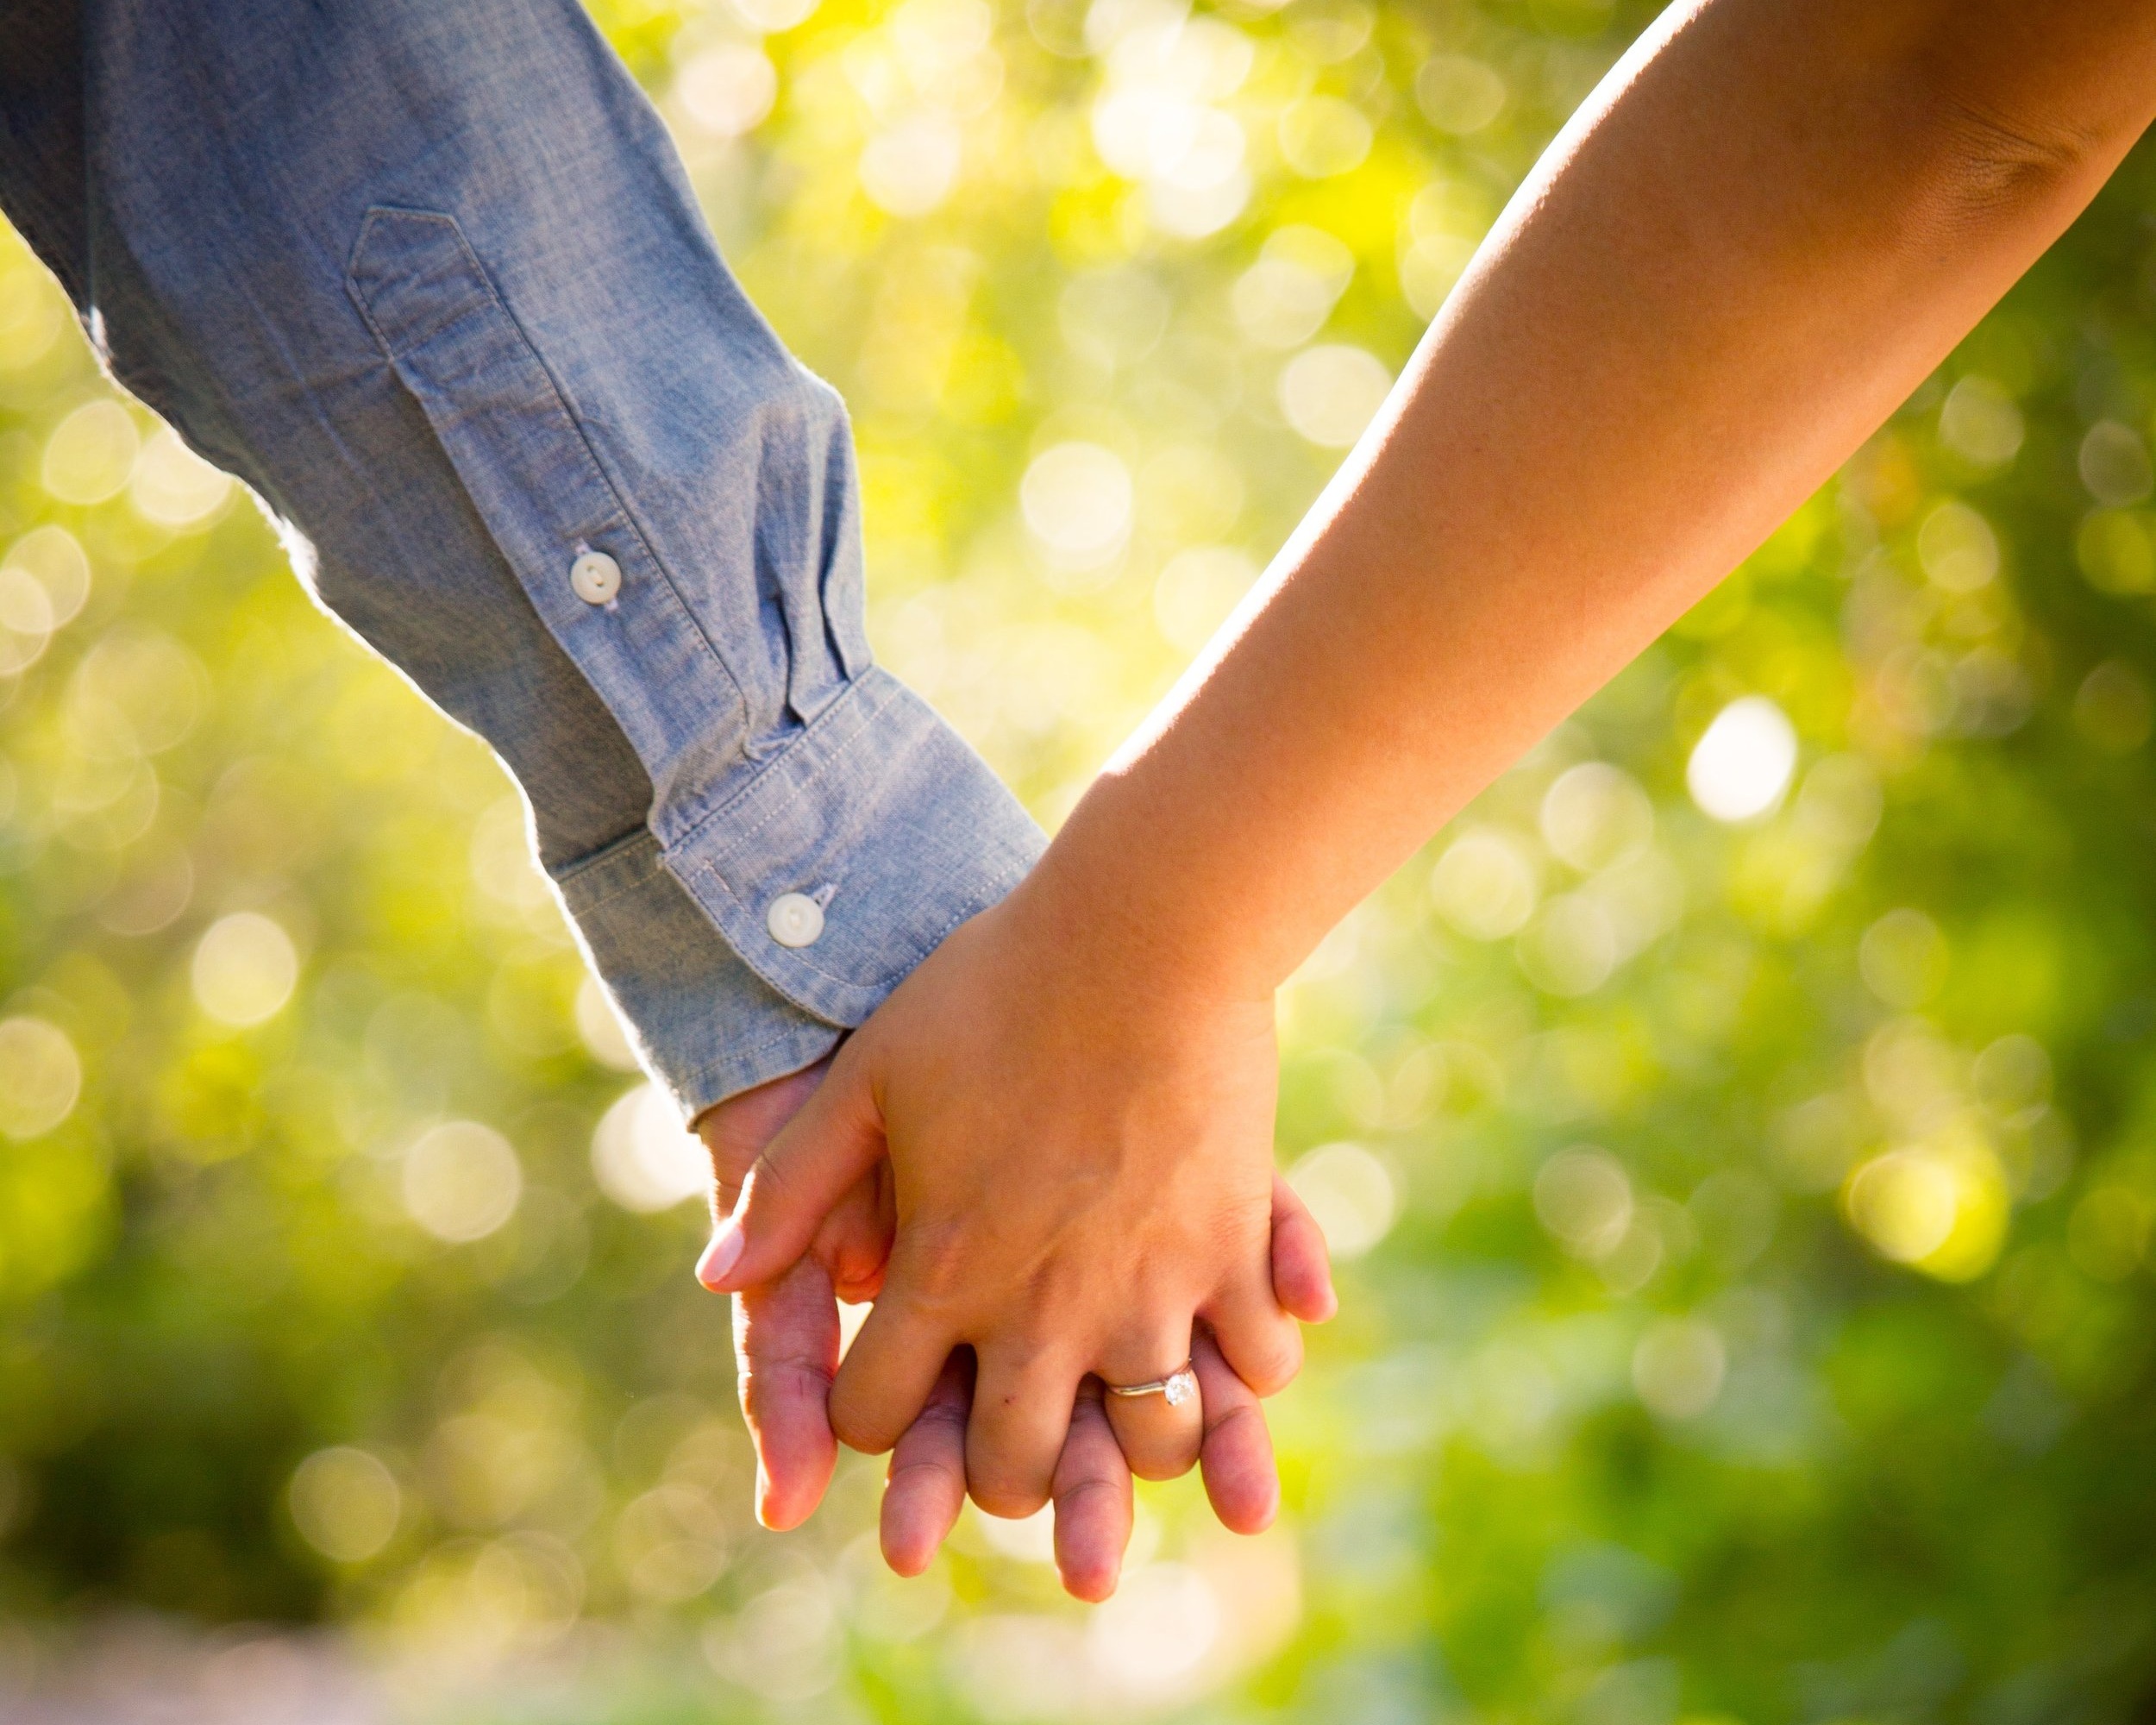 Acceptance and Commitment Therapy for Couples by Avigail Lev